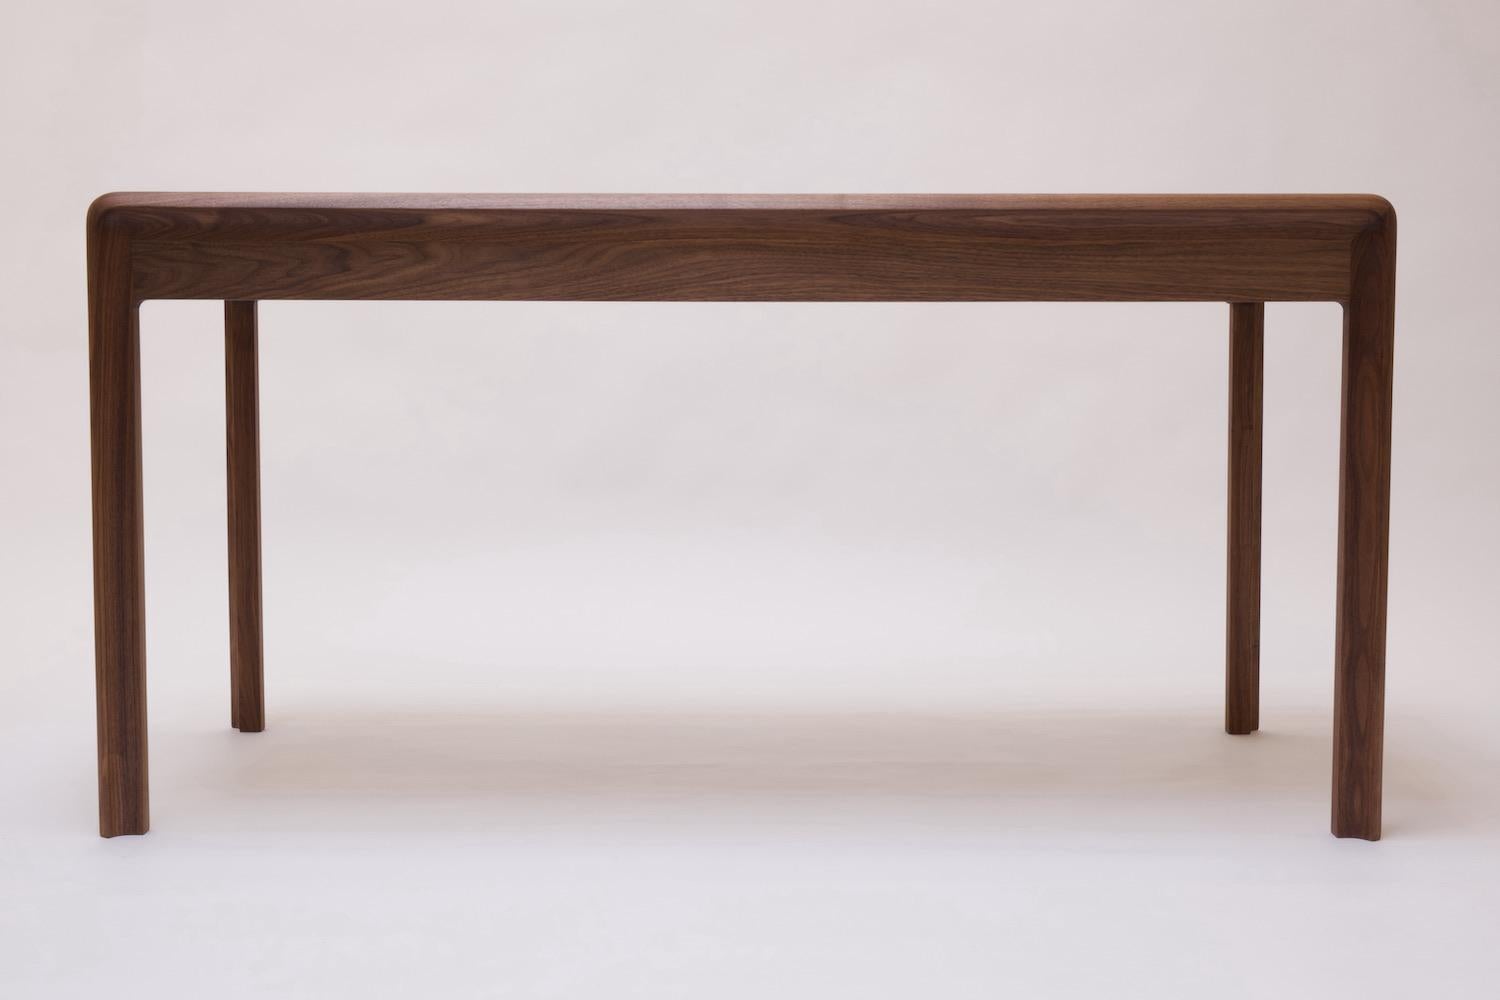 Radius Cutaway Walnut Desk with Drawers In New Condition For Sale In brooklyn, NY